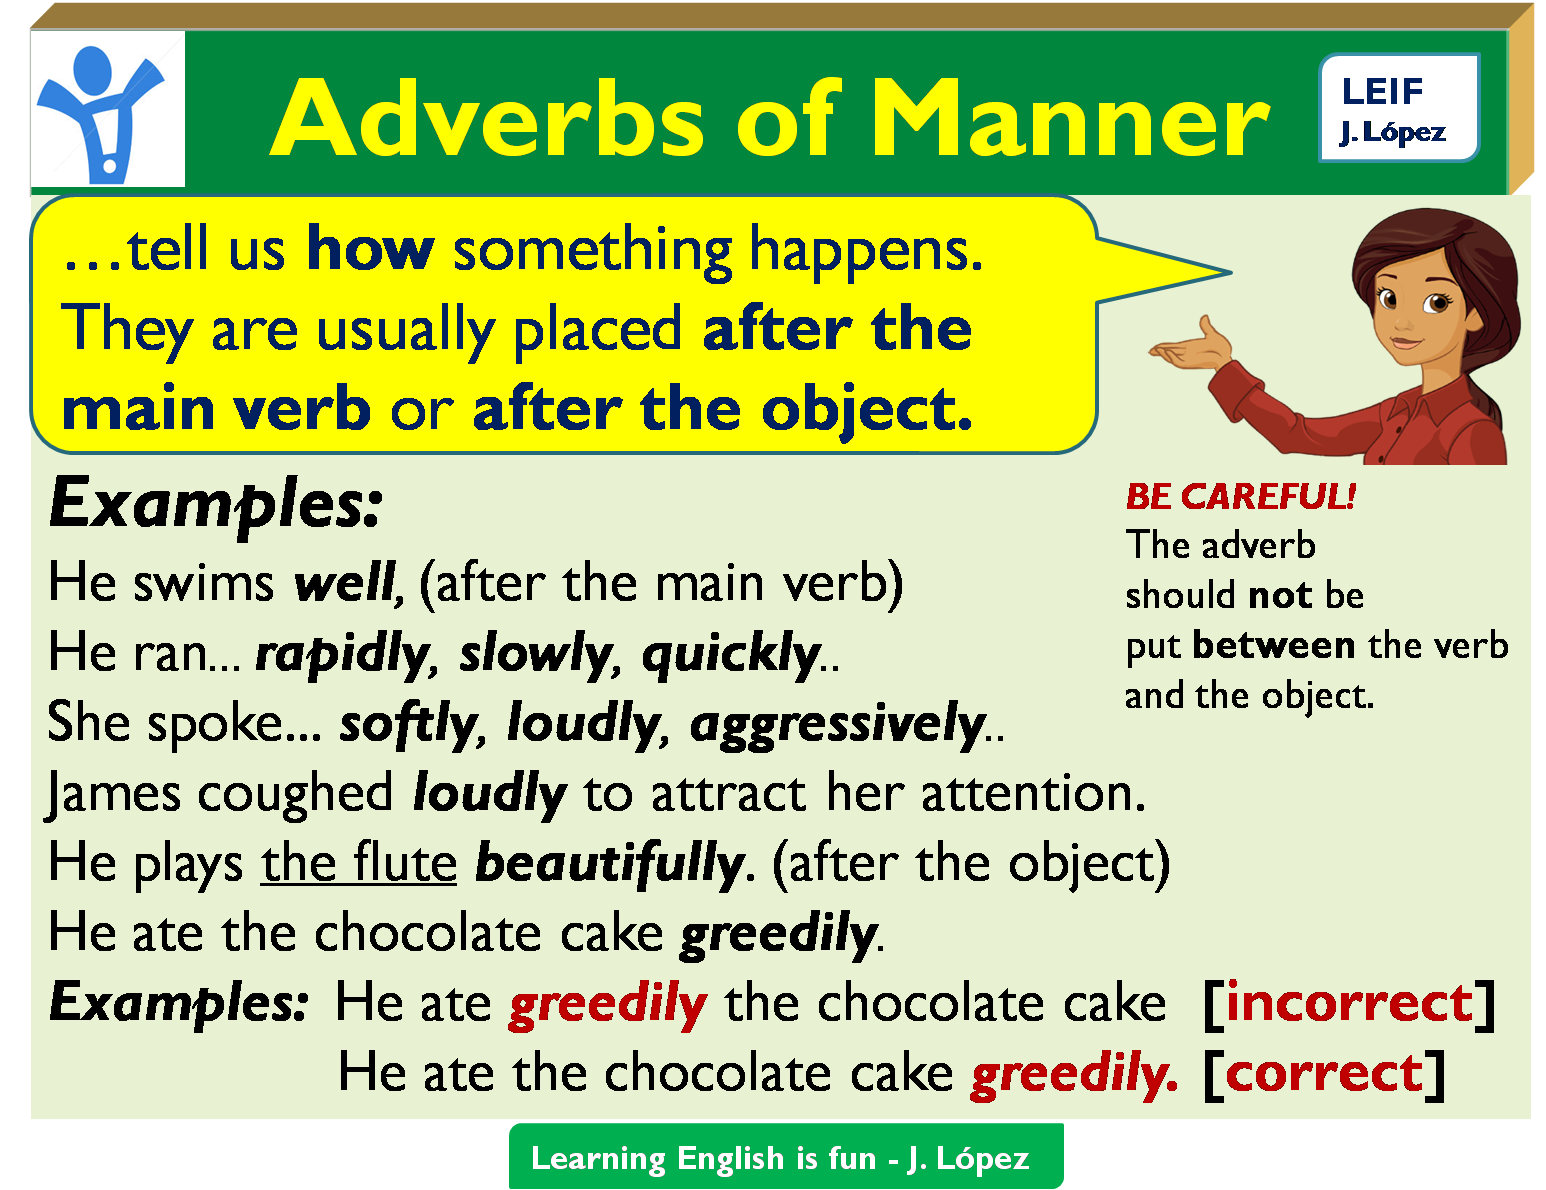 adverbs-of-manner-useful-rules-list-examples-adverbs-teaching-images